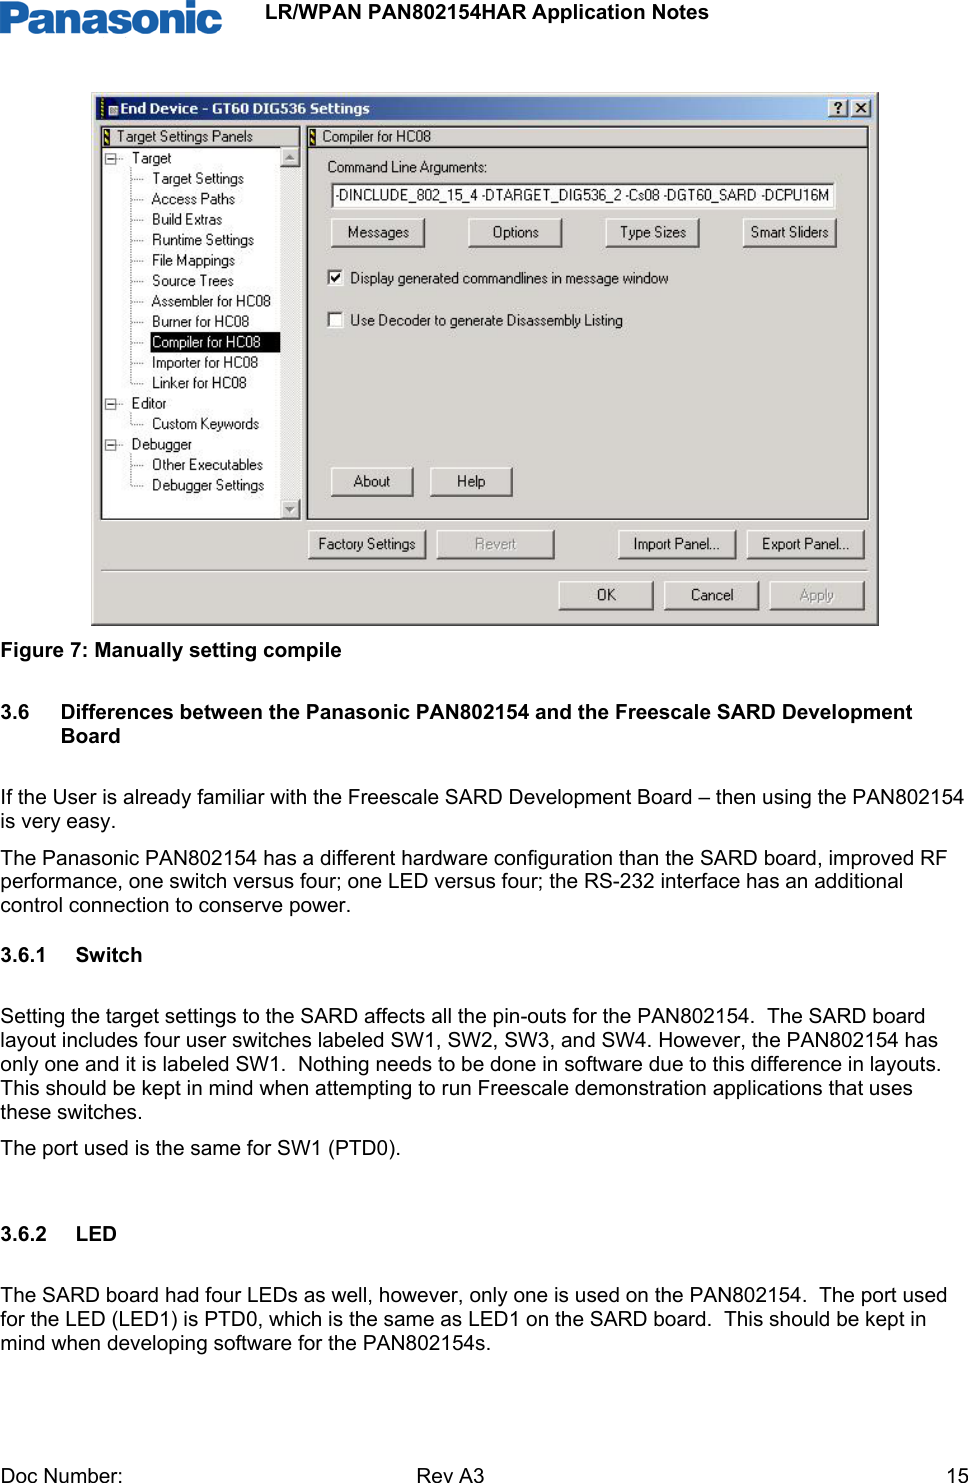                 LR/WPAN PAN802154HAR Application Notes Doc Number:   Rev A3    15 Figure 7: Manually setting compile  3.6  Differences between the Panasonic PAN802154 and the Freescale SARD Development Board If the User is already familiar with the Freescale SARD Development Board – then using the PAN802154 is very easy.  The Panasonic PAN802154 has a different hardware configuration than the SARD board, improved RF performance, one switch versus four; one LED versus four; the RS-232 interface has an additional control connection to conserve power. 3.6.1 Switch Setting the target settings to the SARD affects all the pin-outs for the PAN802154.  The SARD board layout includes four user switches labeled SW1, SW2, SW3, and SW4. However, the PAN802154 has only one and it is labeled SW1.  Nothing needs to be done in software due to this difference in layouts.  This should be kept in mind when attempting to run Freescale demonstration applications that uses these switches.  The port used is the same for SW1 (PTD0).  3.6.2 LED The SARD board had four LEDs as well, however, only one is used on the PAN802154.  The port used for the LED (LED1) is PTD0, which is the same as LED1 on the SARD board.  This should be kept in mind when developing software for the PAN802154s.  